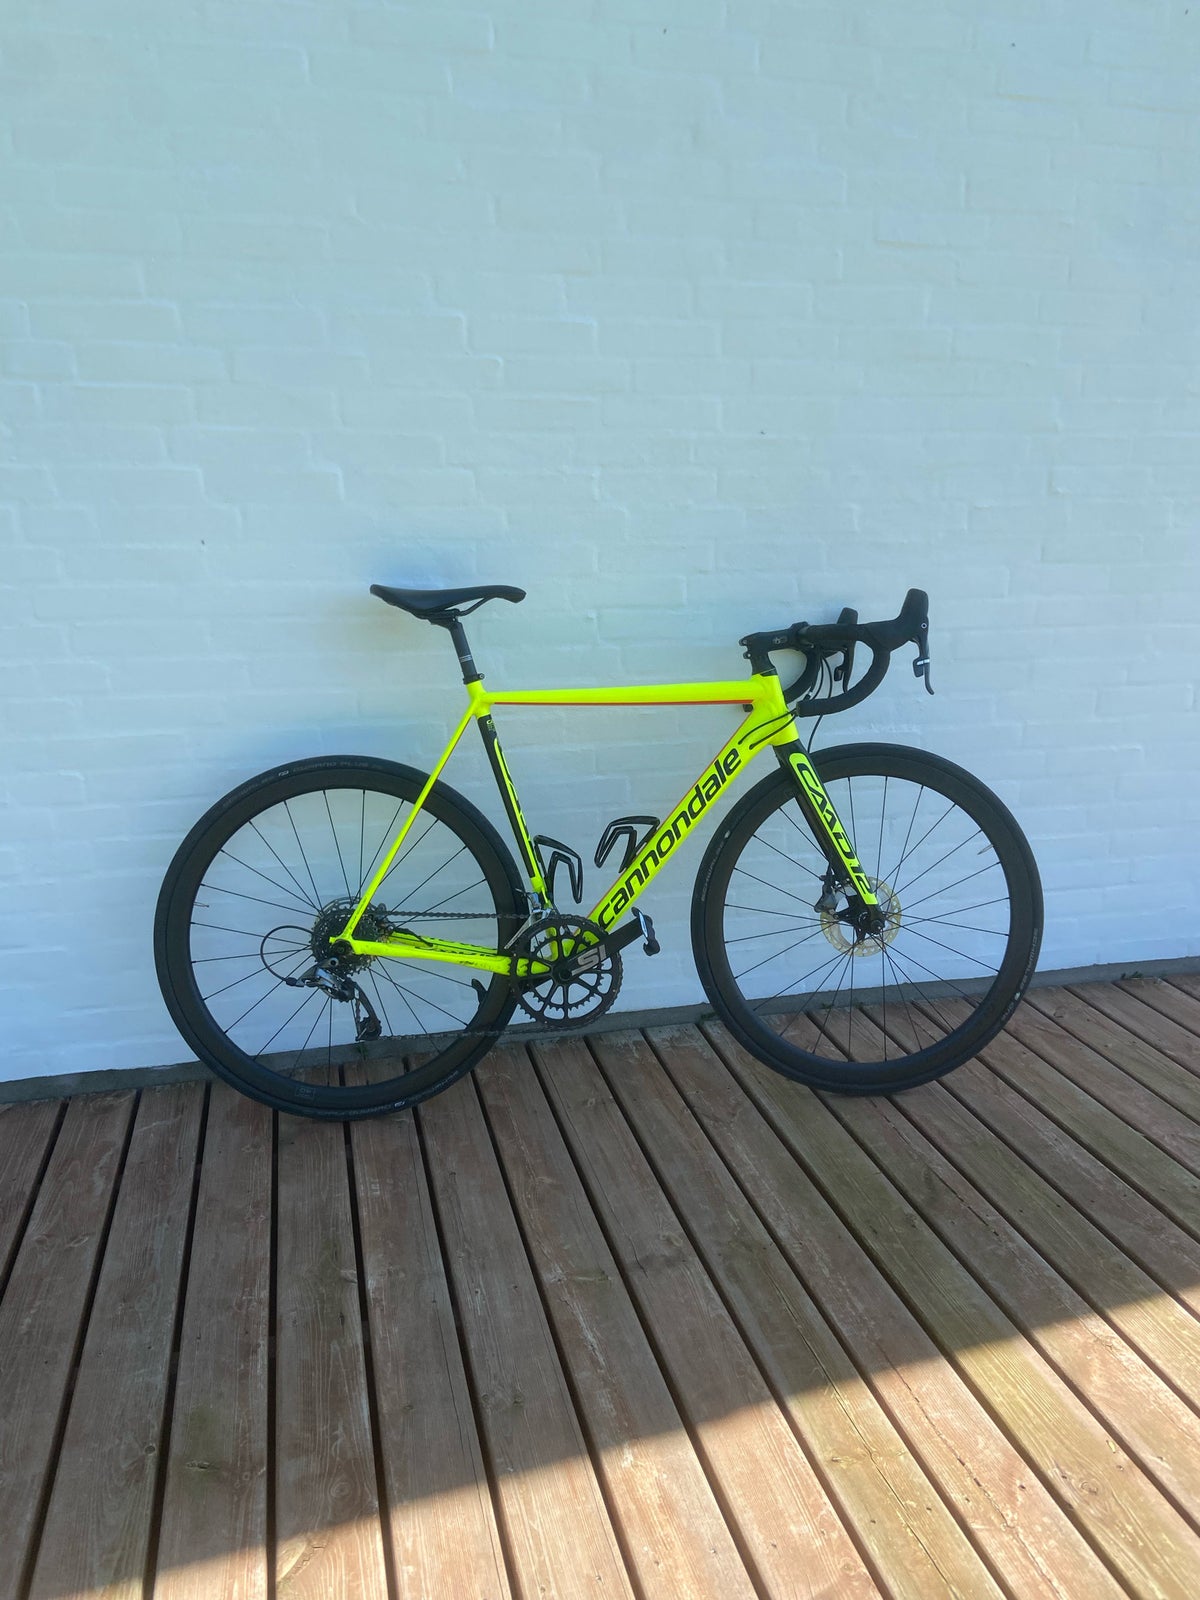 Herreracer, Cannondale Caad 12, 54 cm stel